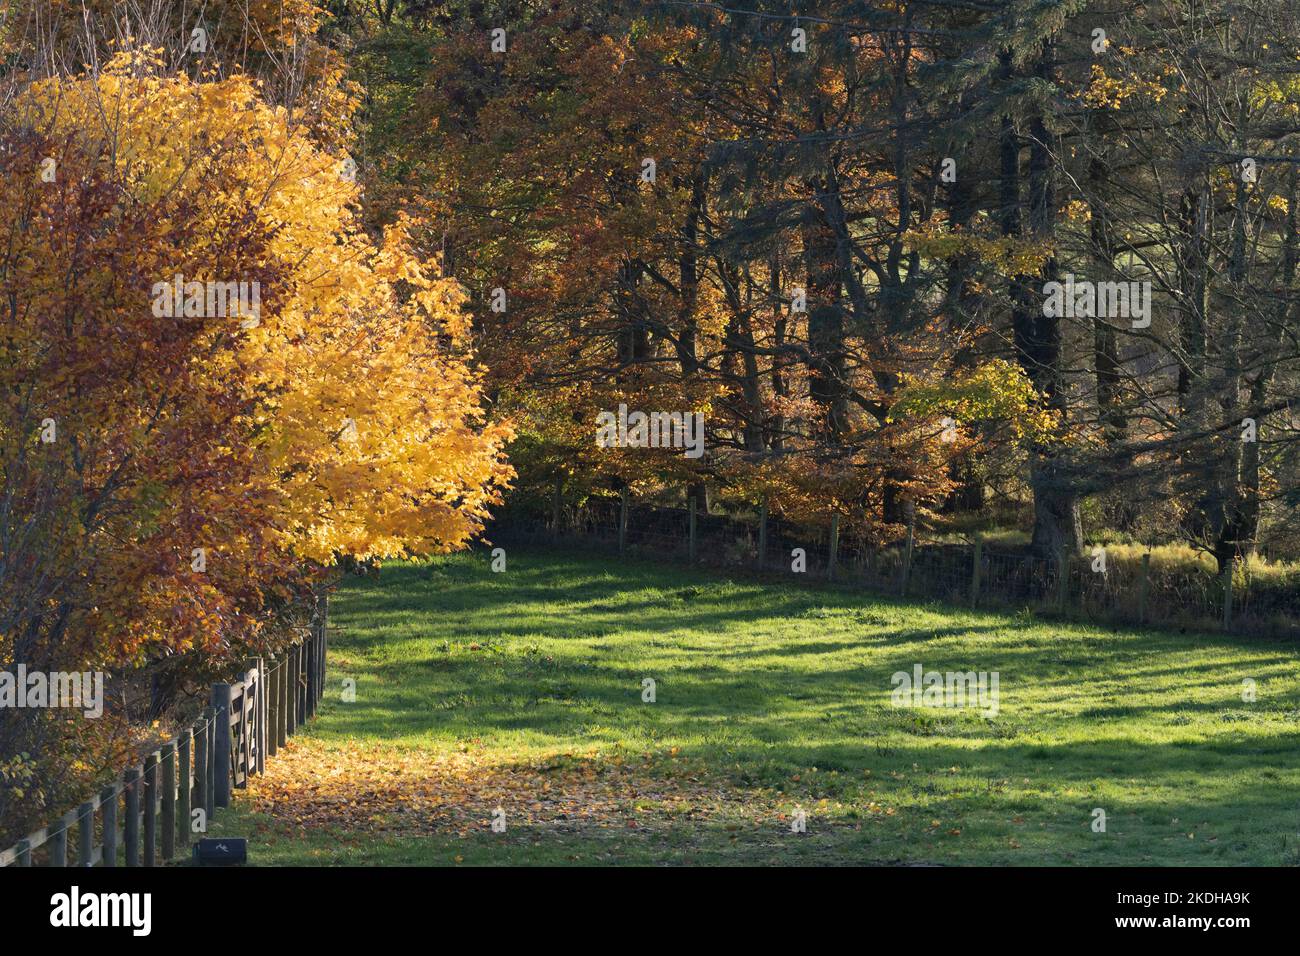 A Field in Autumn Surrounded by Colourful Foliage Stock Photo